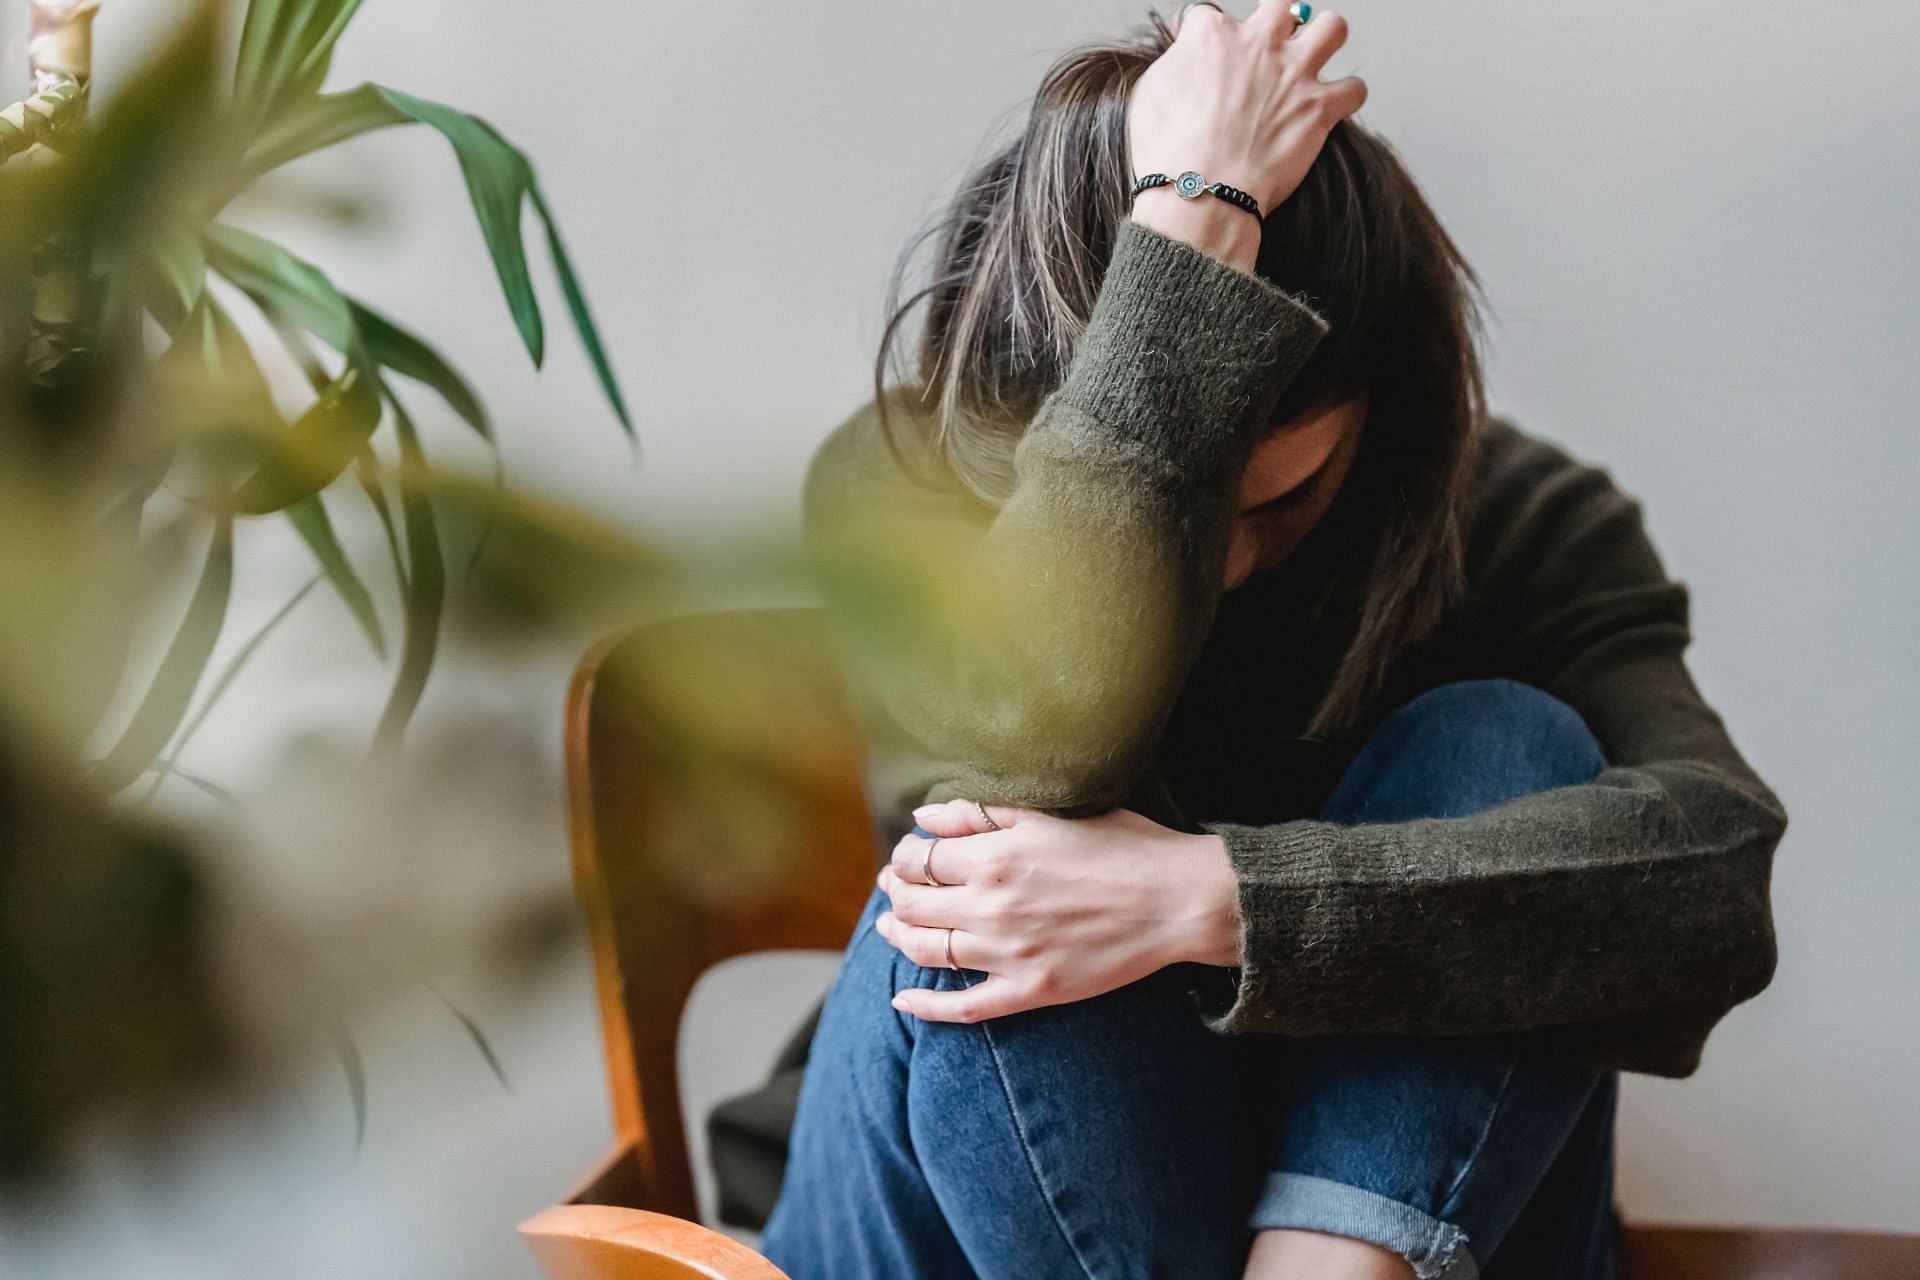 How do mood disorders impact our well-being? (Image via Pexels/ Liza Summer)